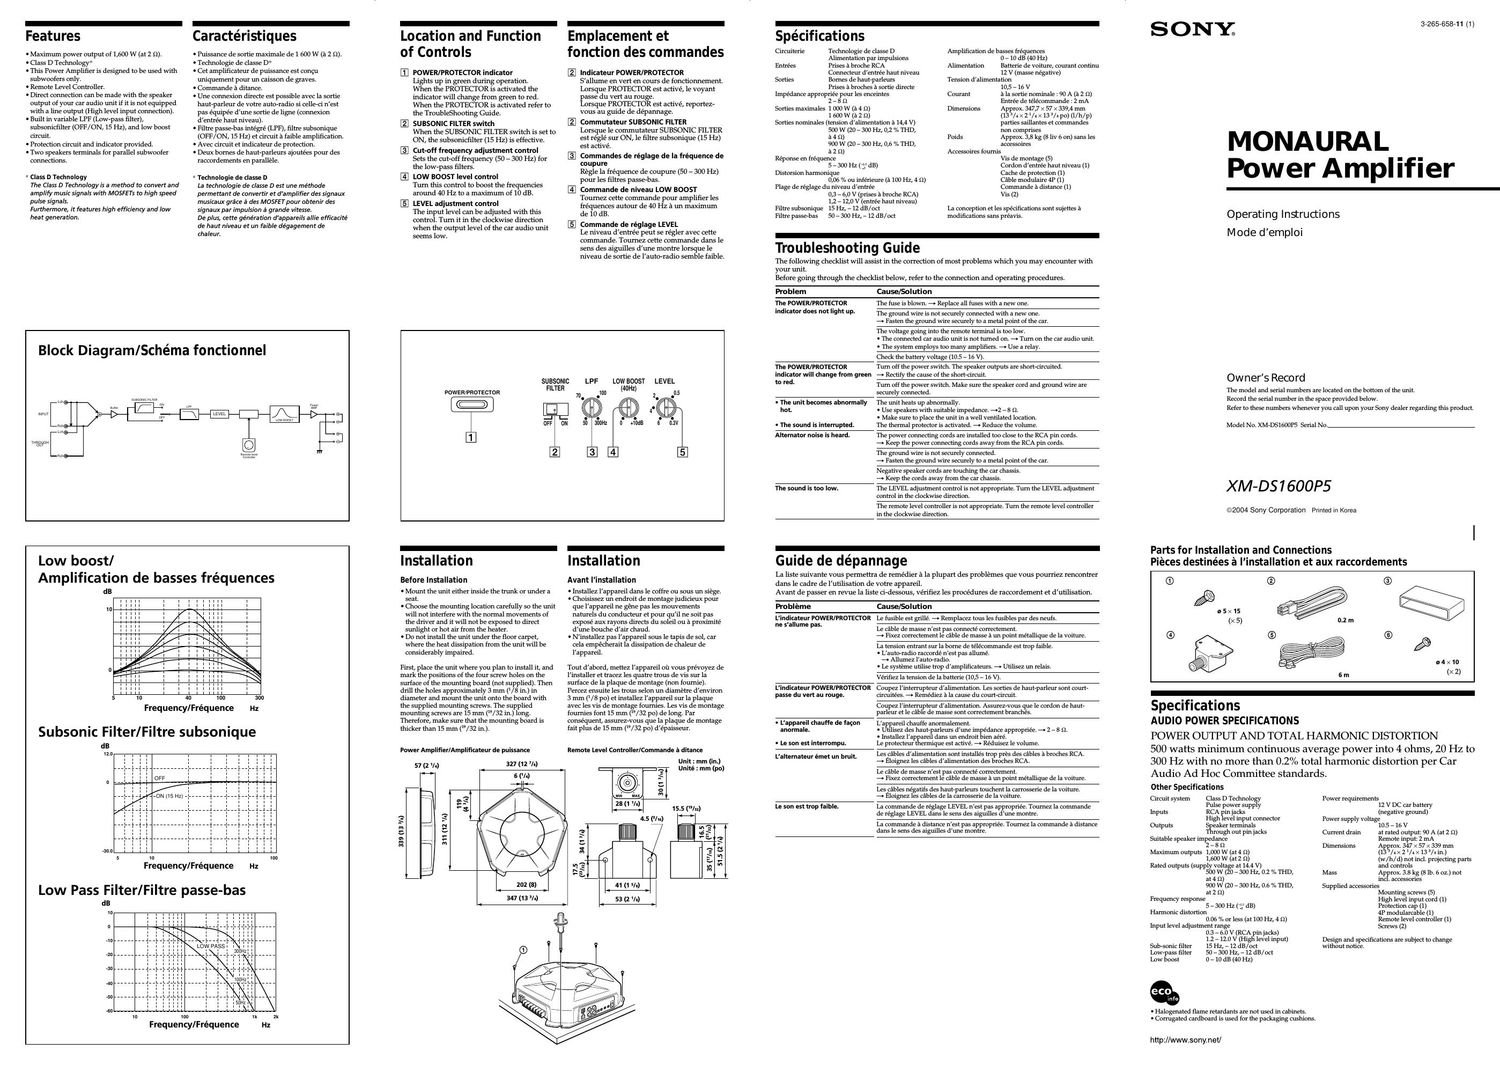 sony xmds 1600 p5 owners manual